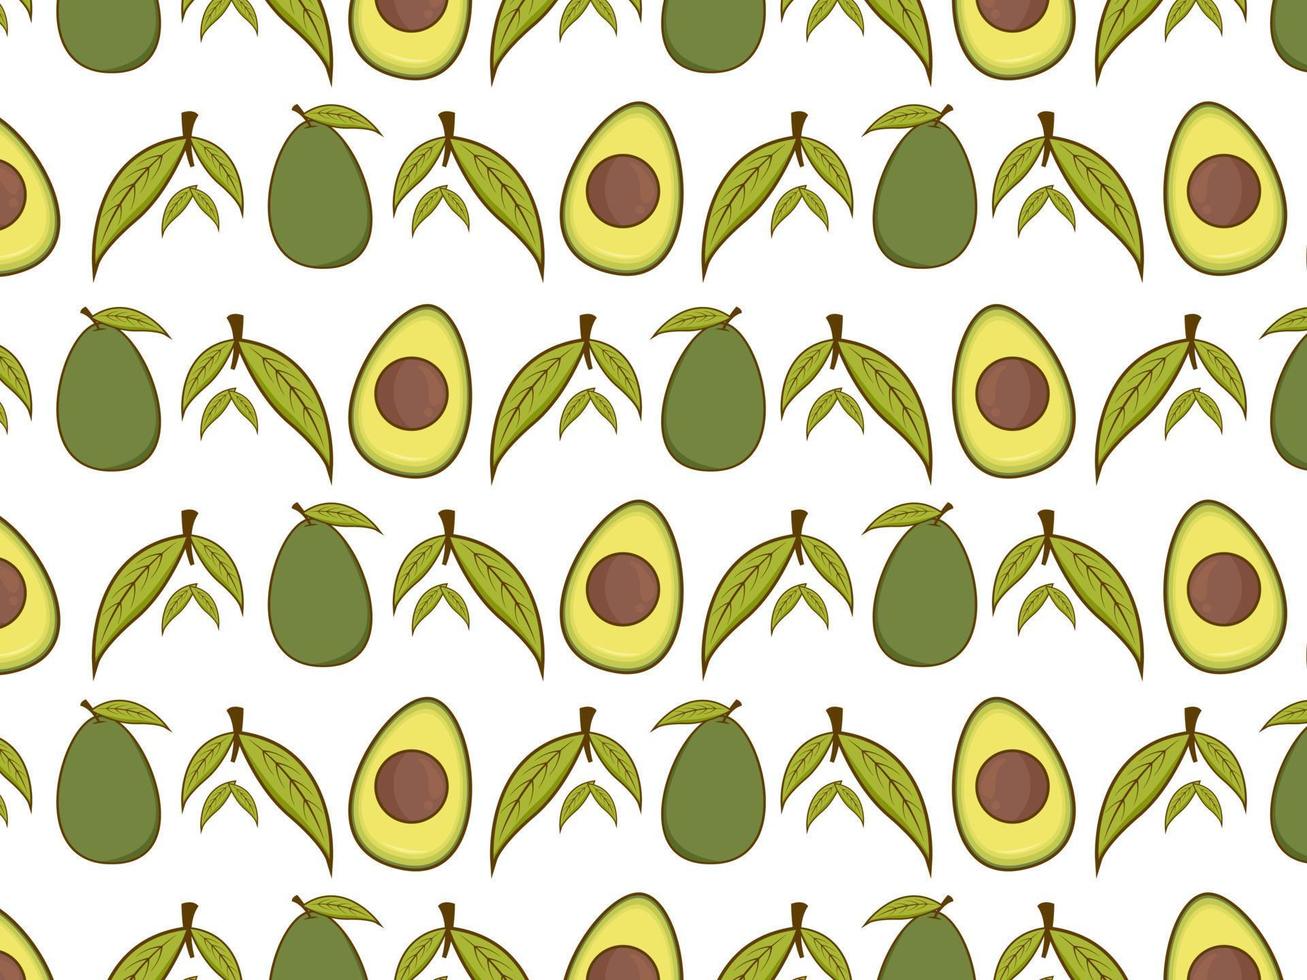 Seamless avocado pattern, avocado slices, leaves on white background. It can be used for packaging, wrapping paper, greeting cards, stickers, fabric, and prints. vector